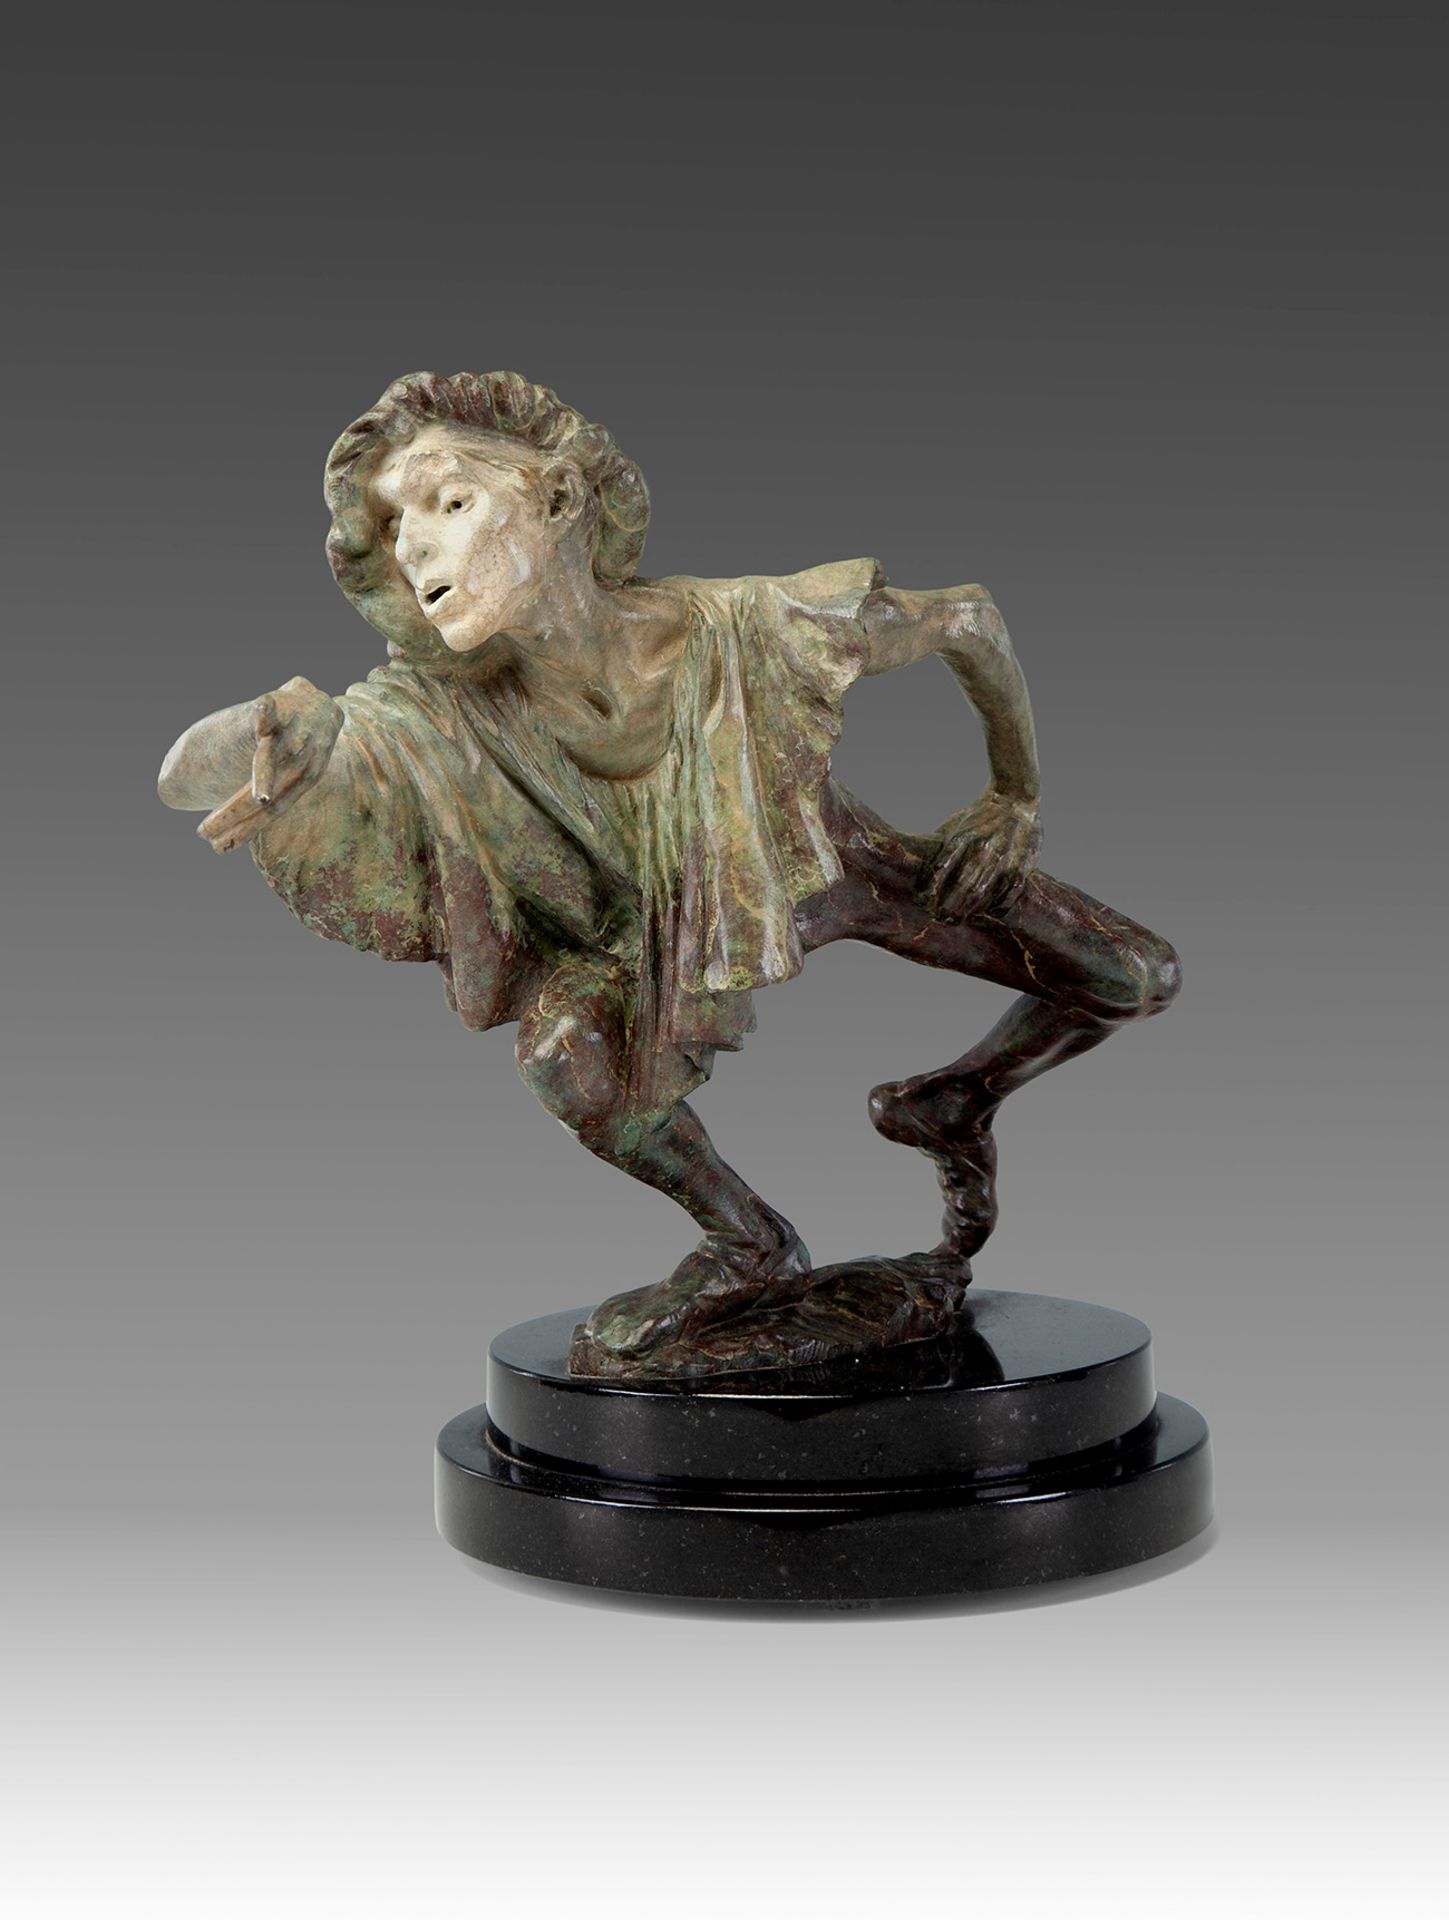 RICHARD MACDONALD (USA,1946)."Mime".Bronze, specimen 19/950.Signed and justified on the base.